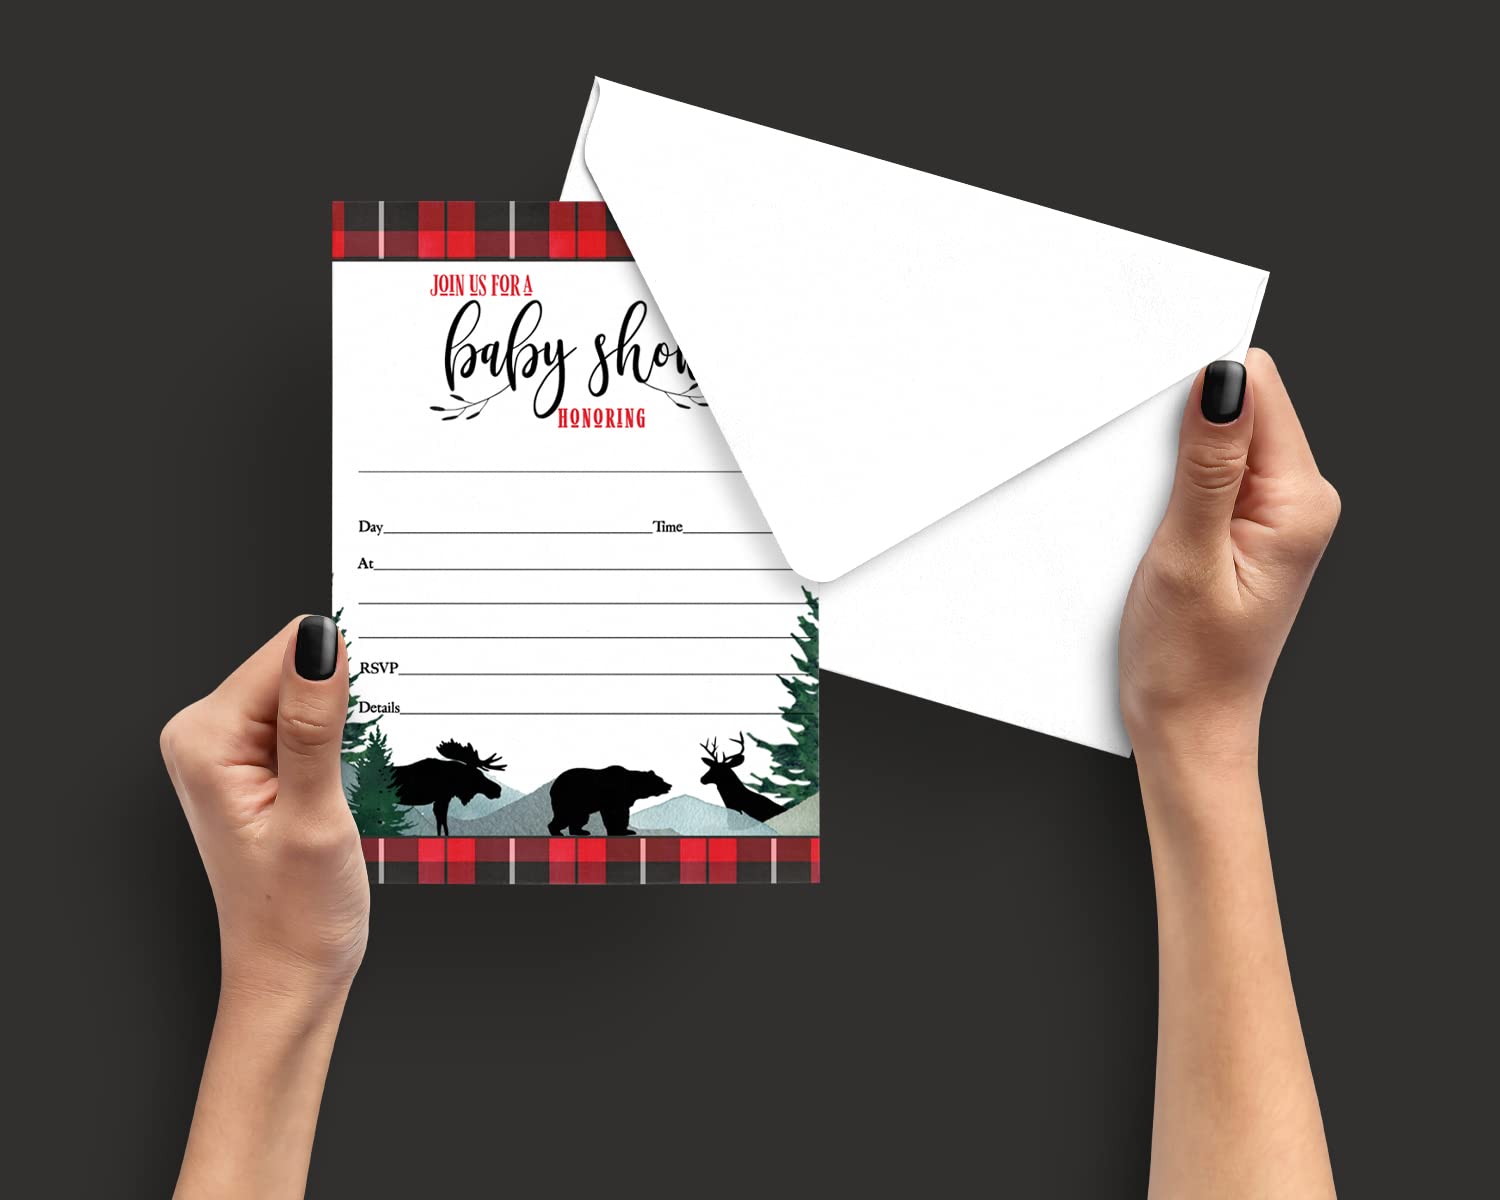 Lumberjack Invitations with Envelopes (25 Pack) Baby Bear Shower Invites Blank Fill-In Party Details - Red and Black Plaid - 5x7 Size Set - Paper Clever Party